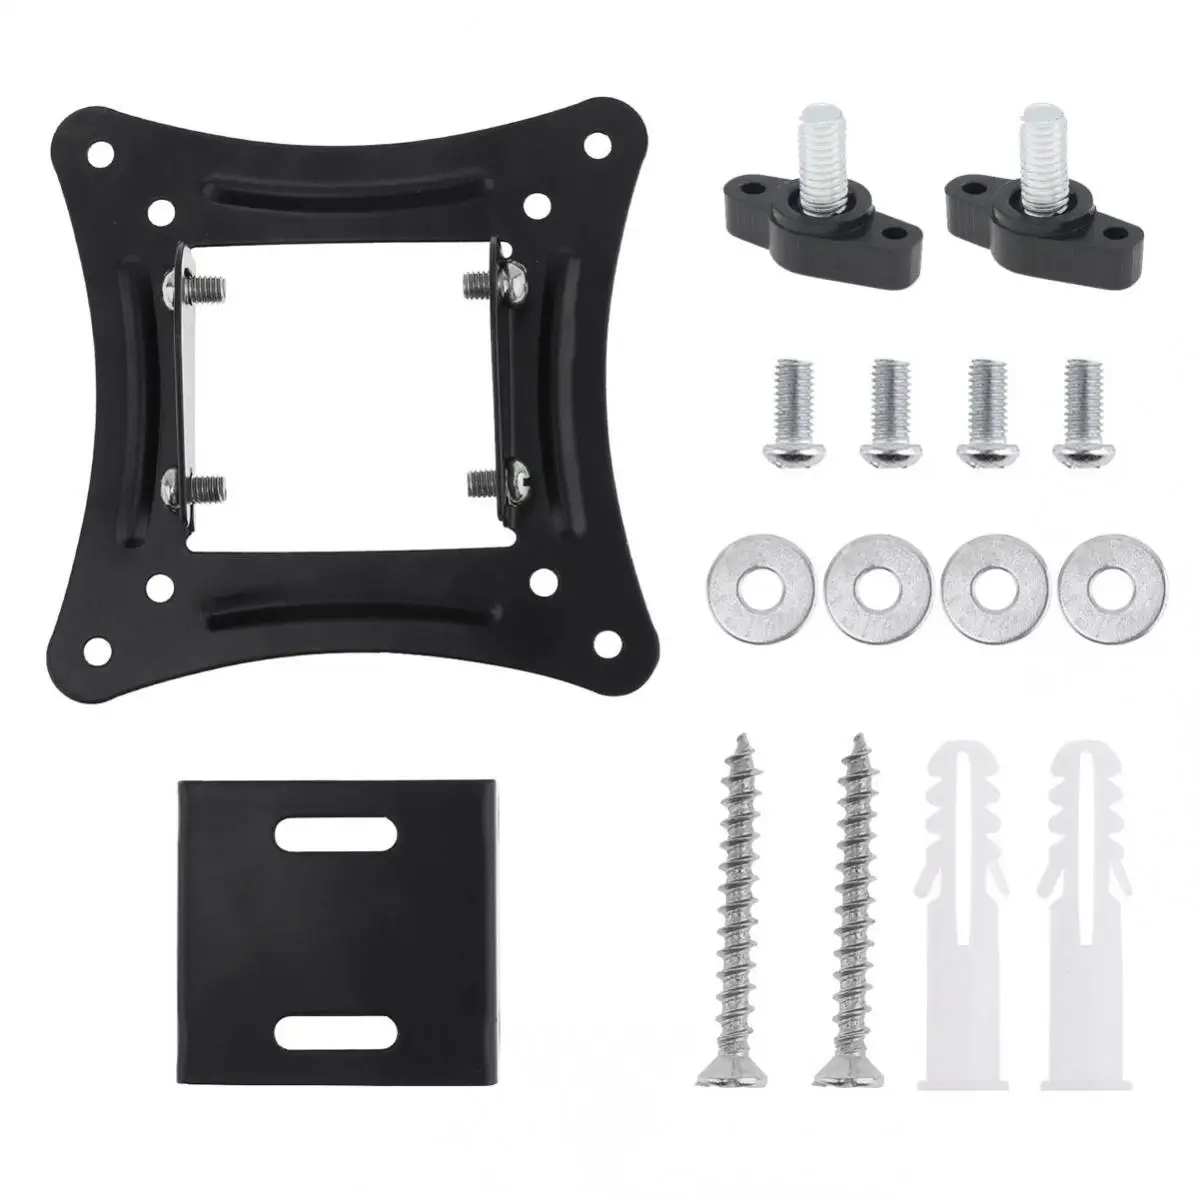 LED Monitor, Wall Mount, Montagens Suporte, ângulo